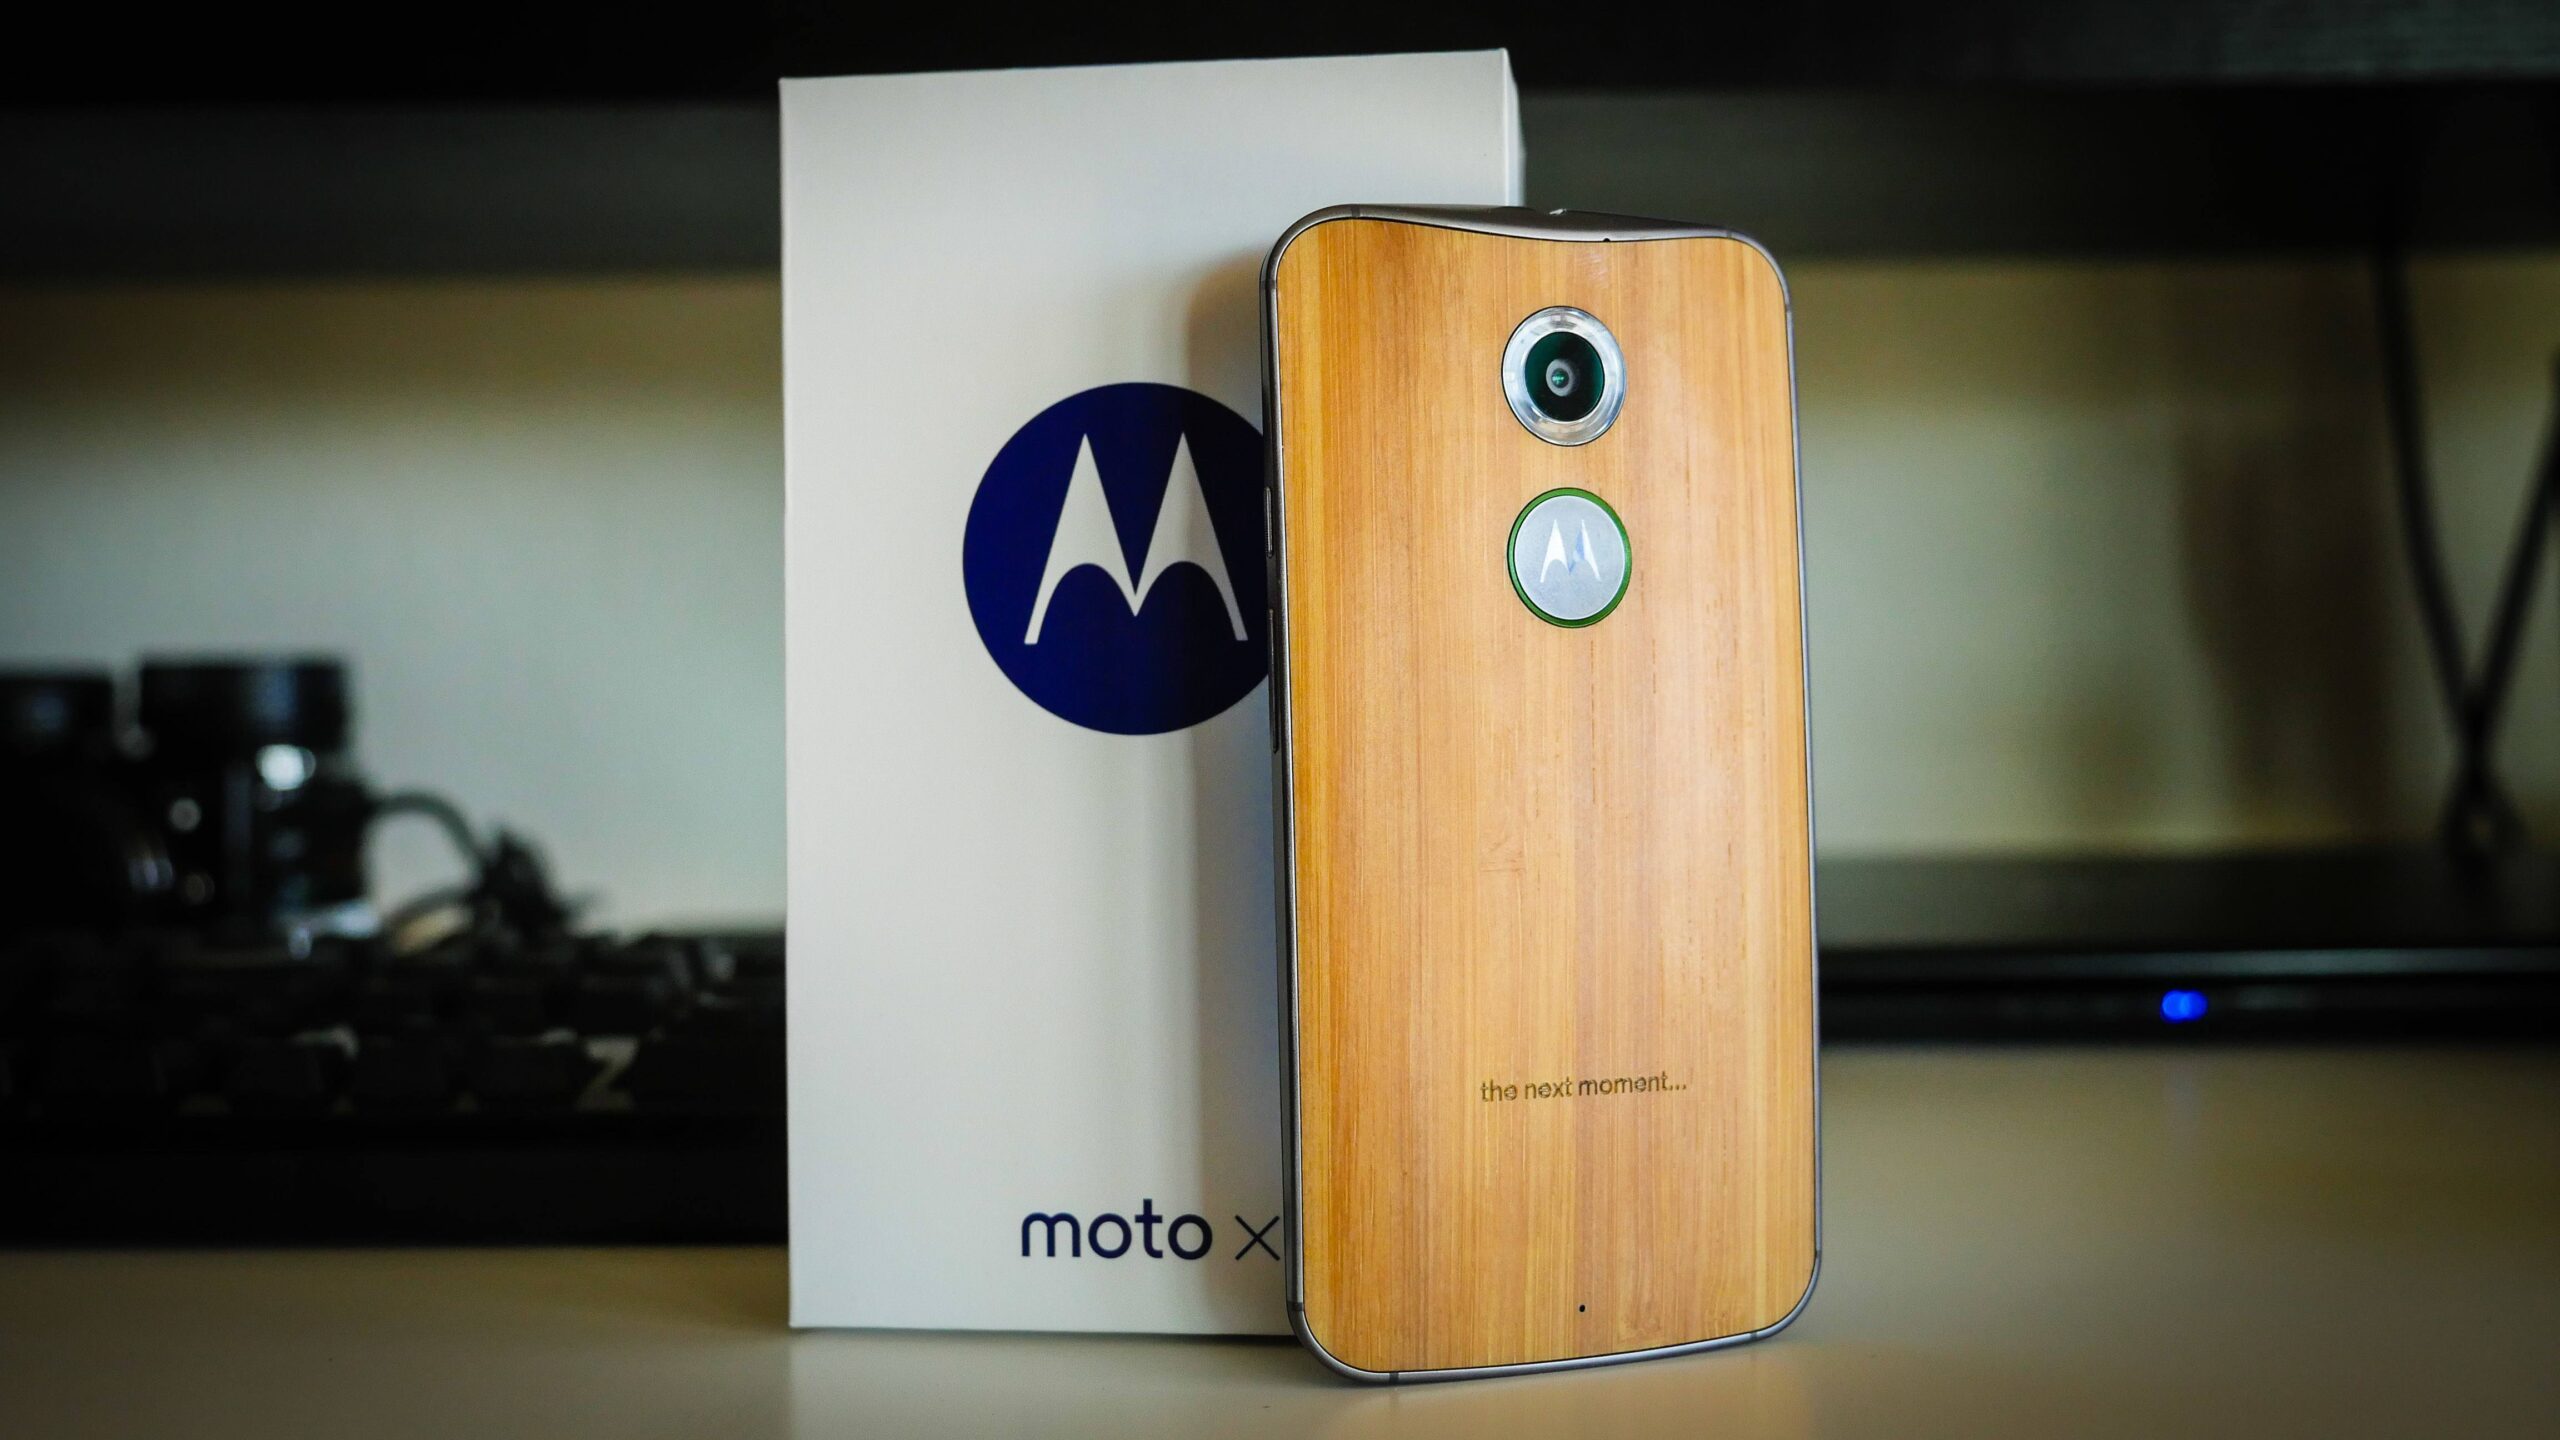 moto x 2014 first impressions (17 of 18)